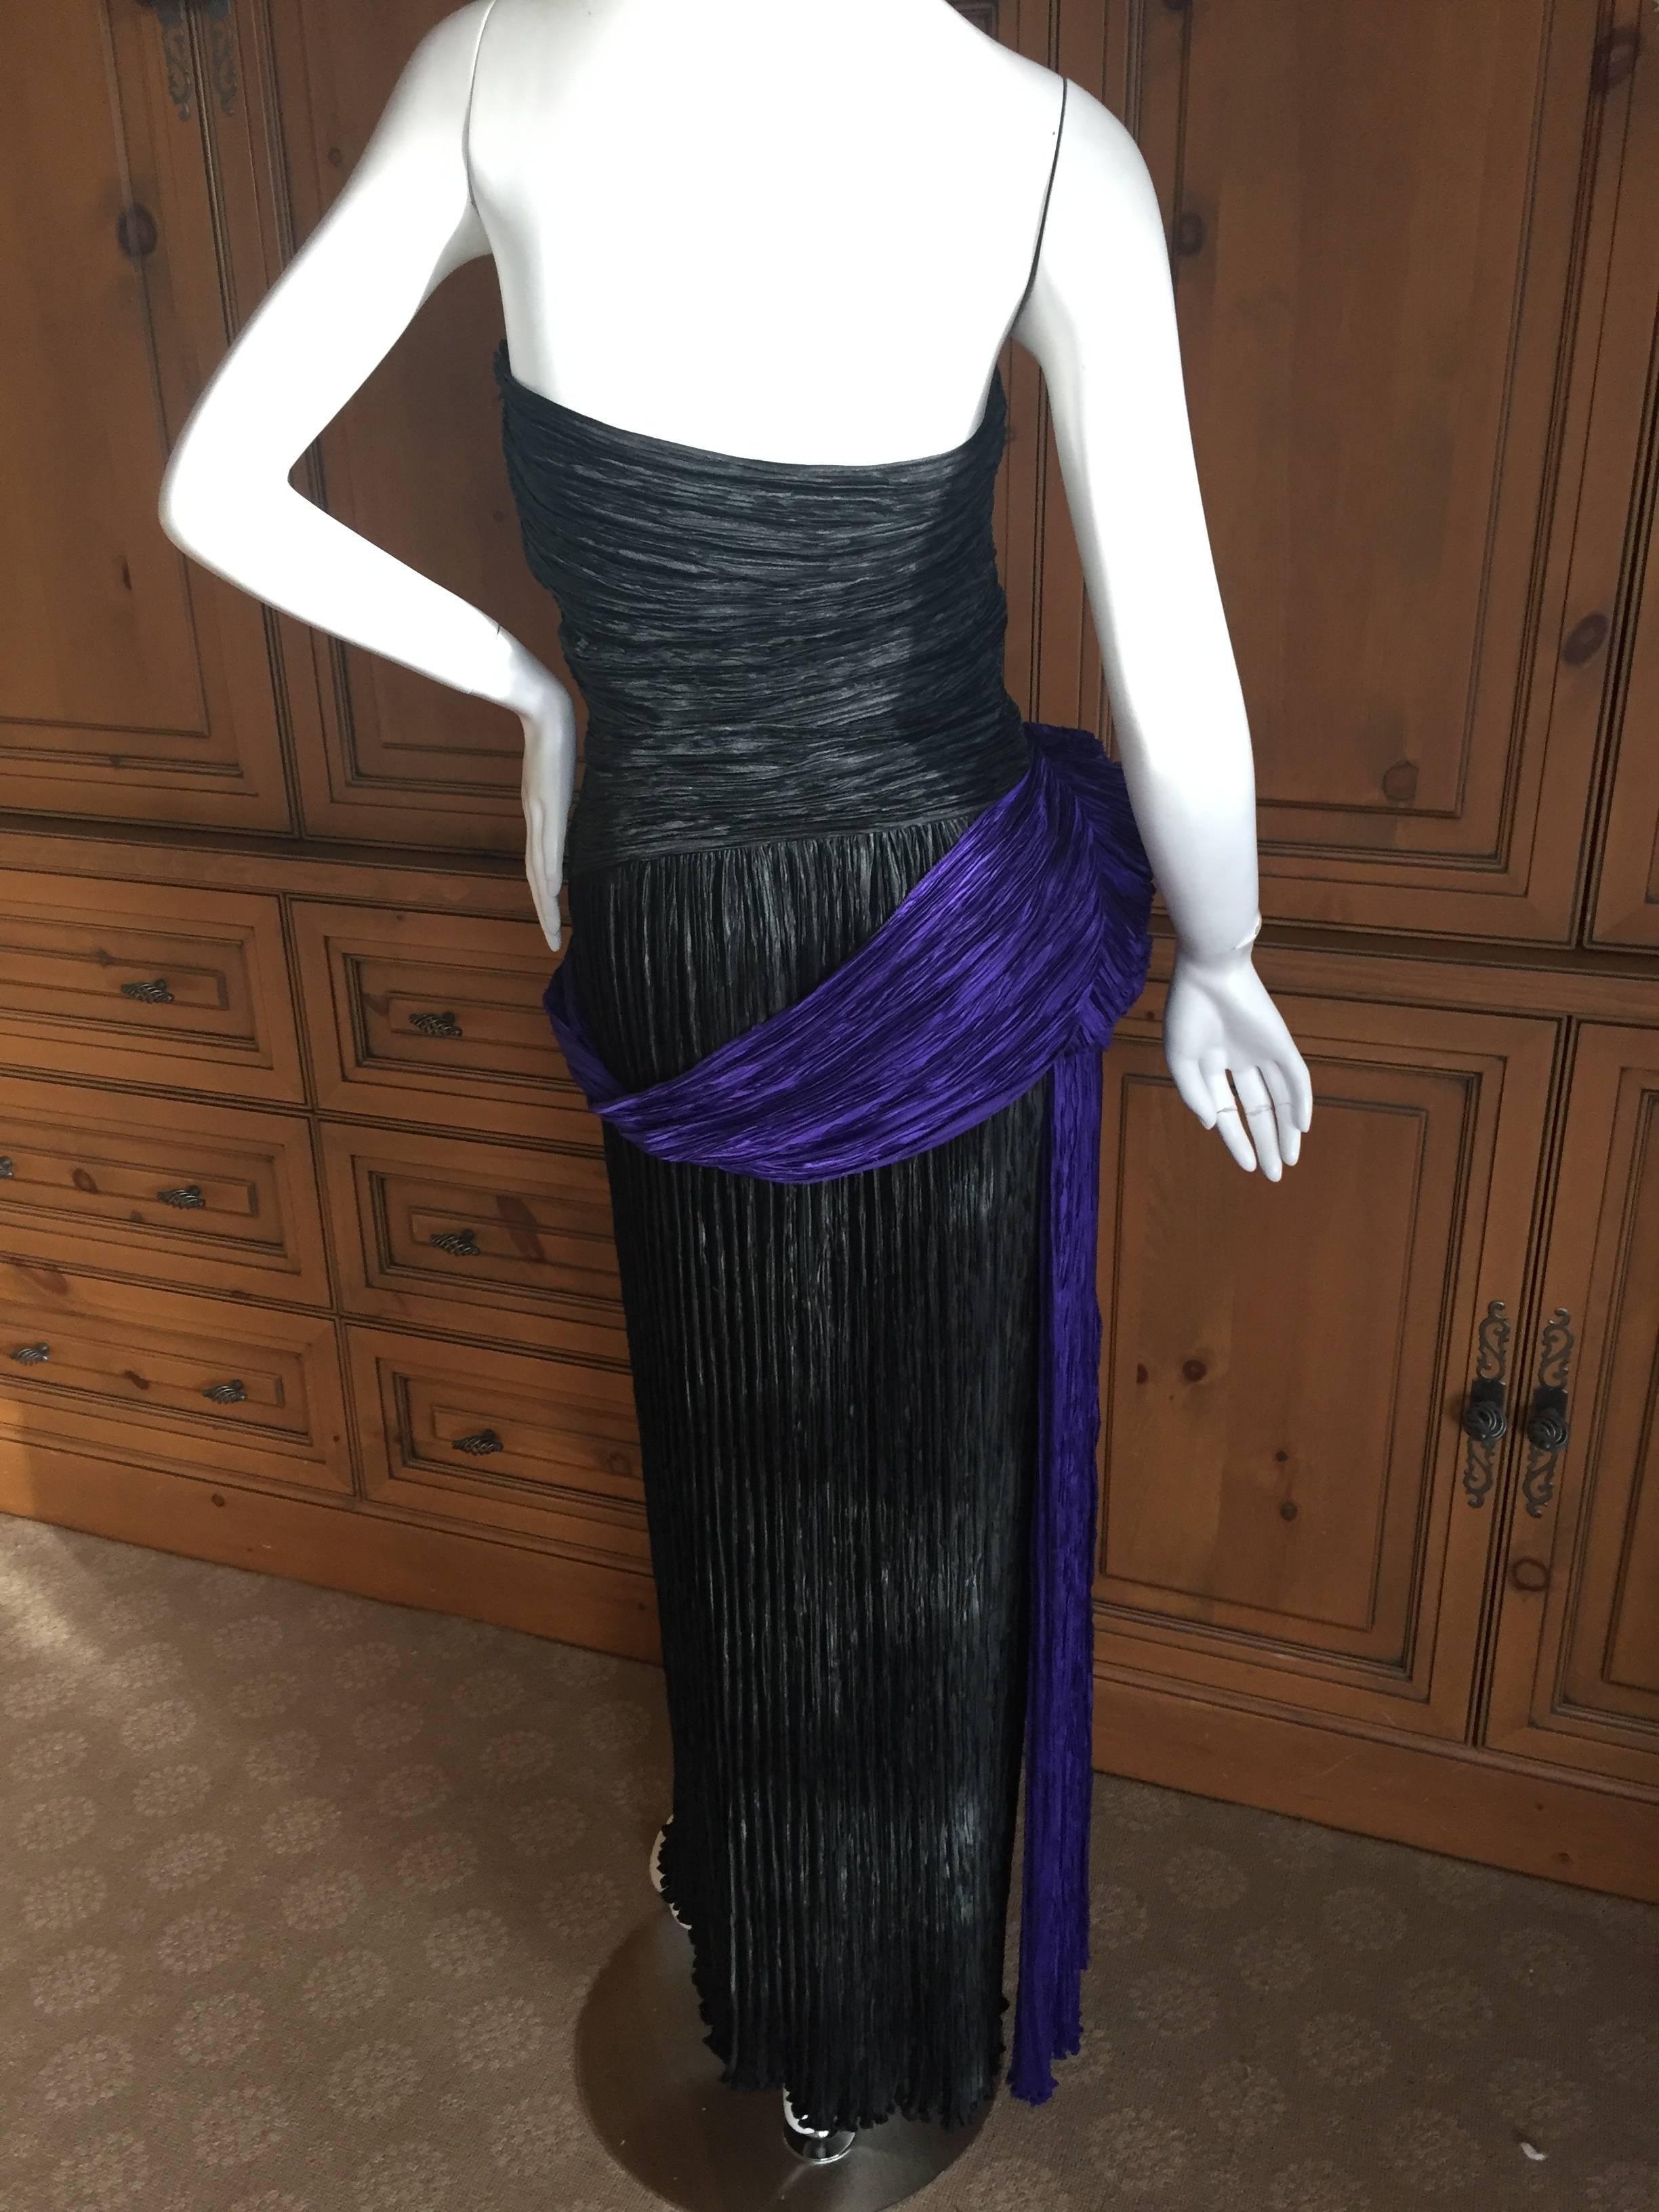 Beautiful black and purple pleated evening dress from Mary McFadden, circa 1979.
This dress was featured in the Antonio Lopez Illustration for the 1979 Cody Awards . (Litho available on 1stdibs)
I'm not certain I styled the draping details